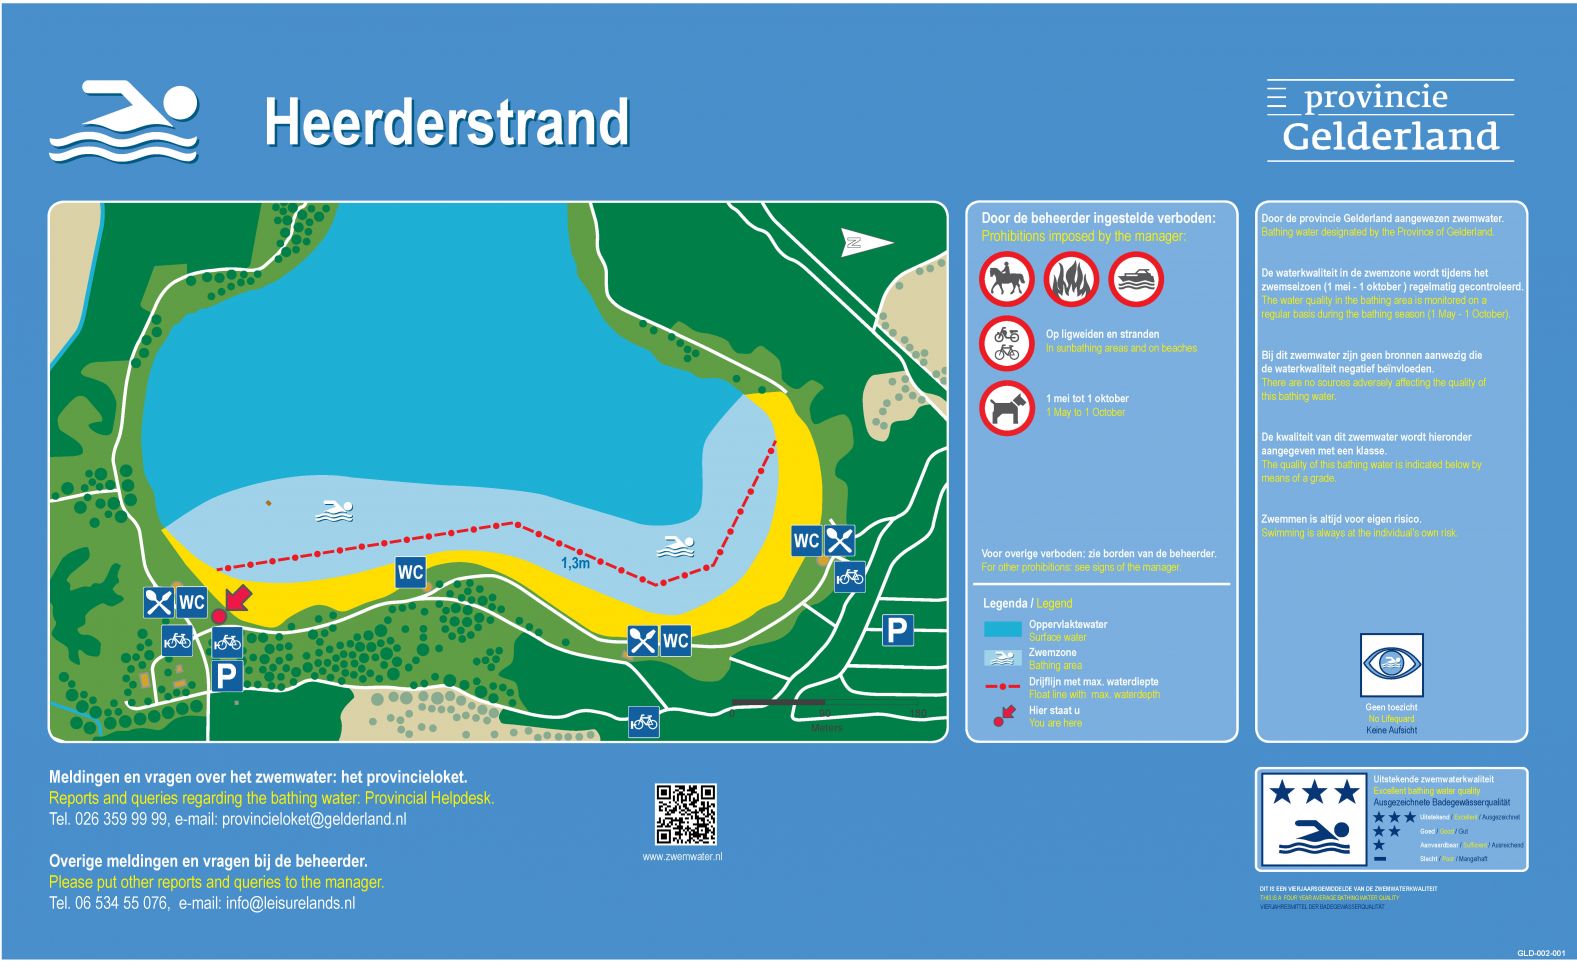 The information board at the swimming location Heerderstrand I Zuid